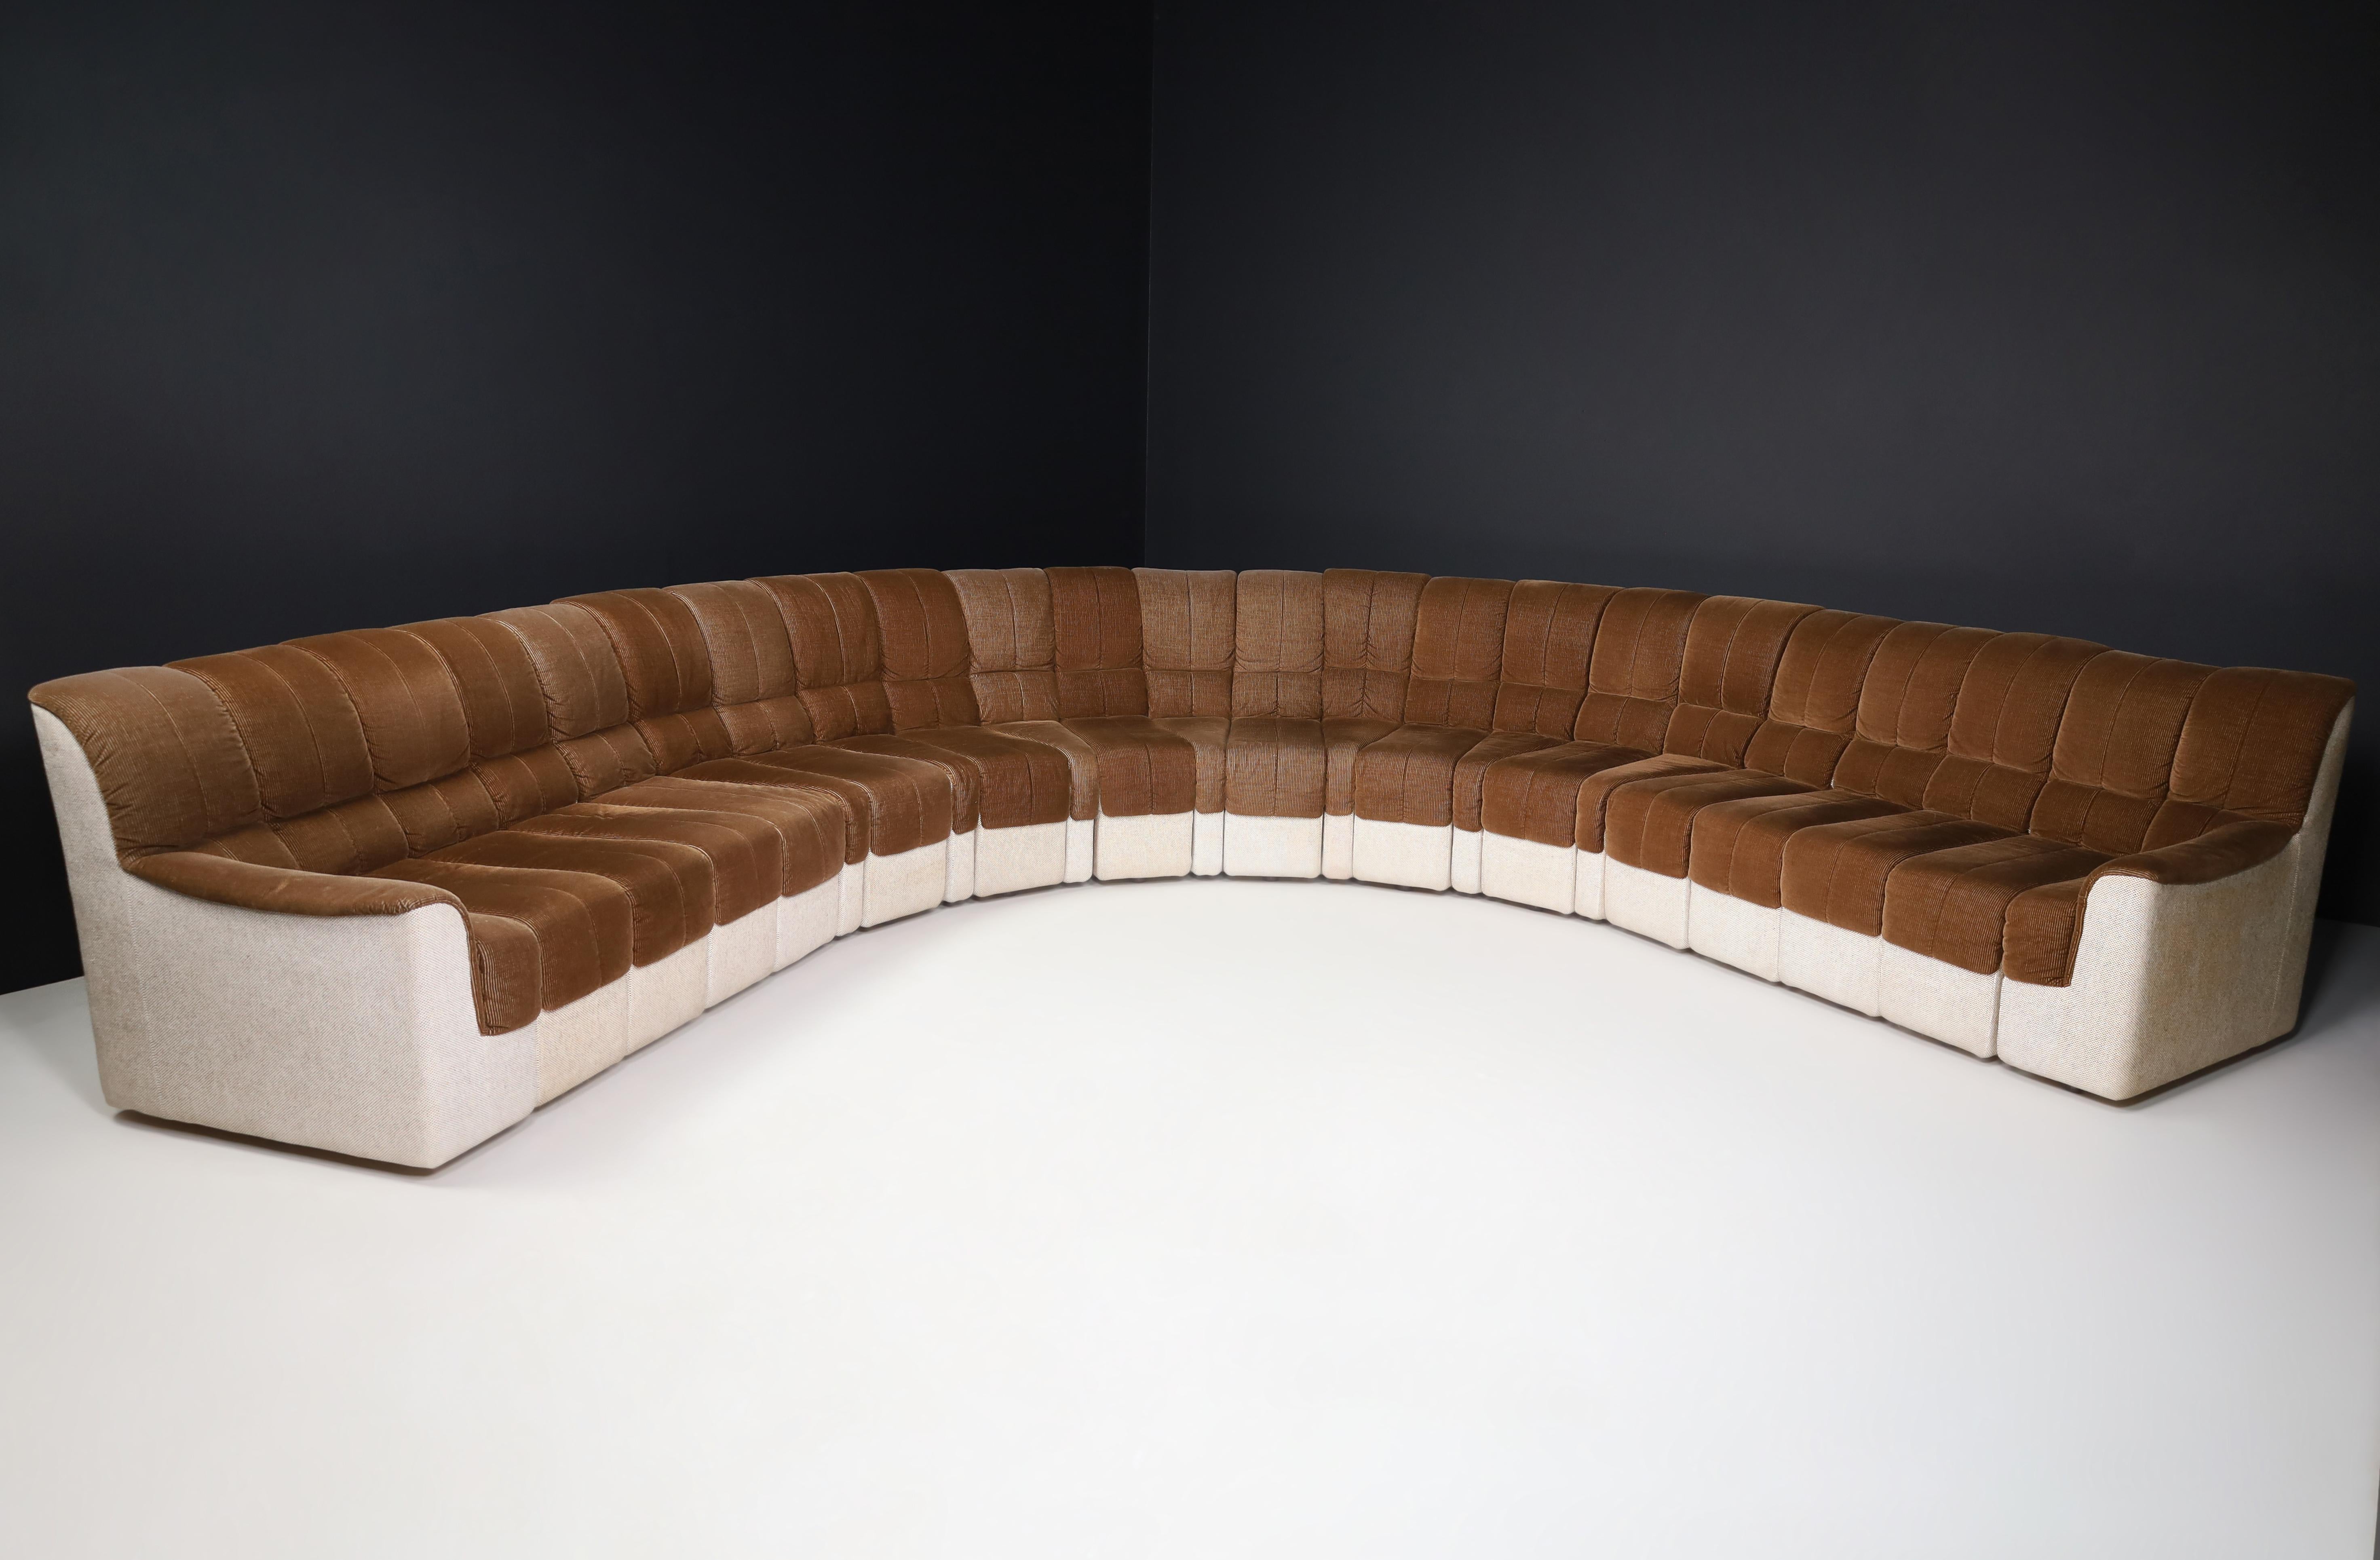 De Sede DS-600 Style Round Sofa in Corduroy Fabric, Germany, 1970s For Sale 8